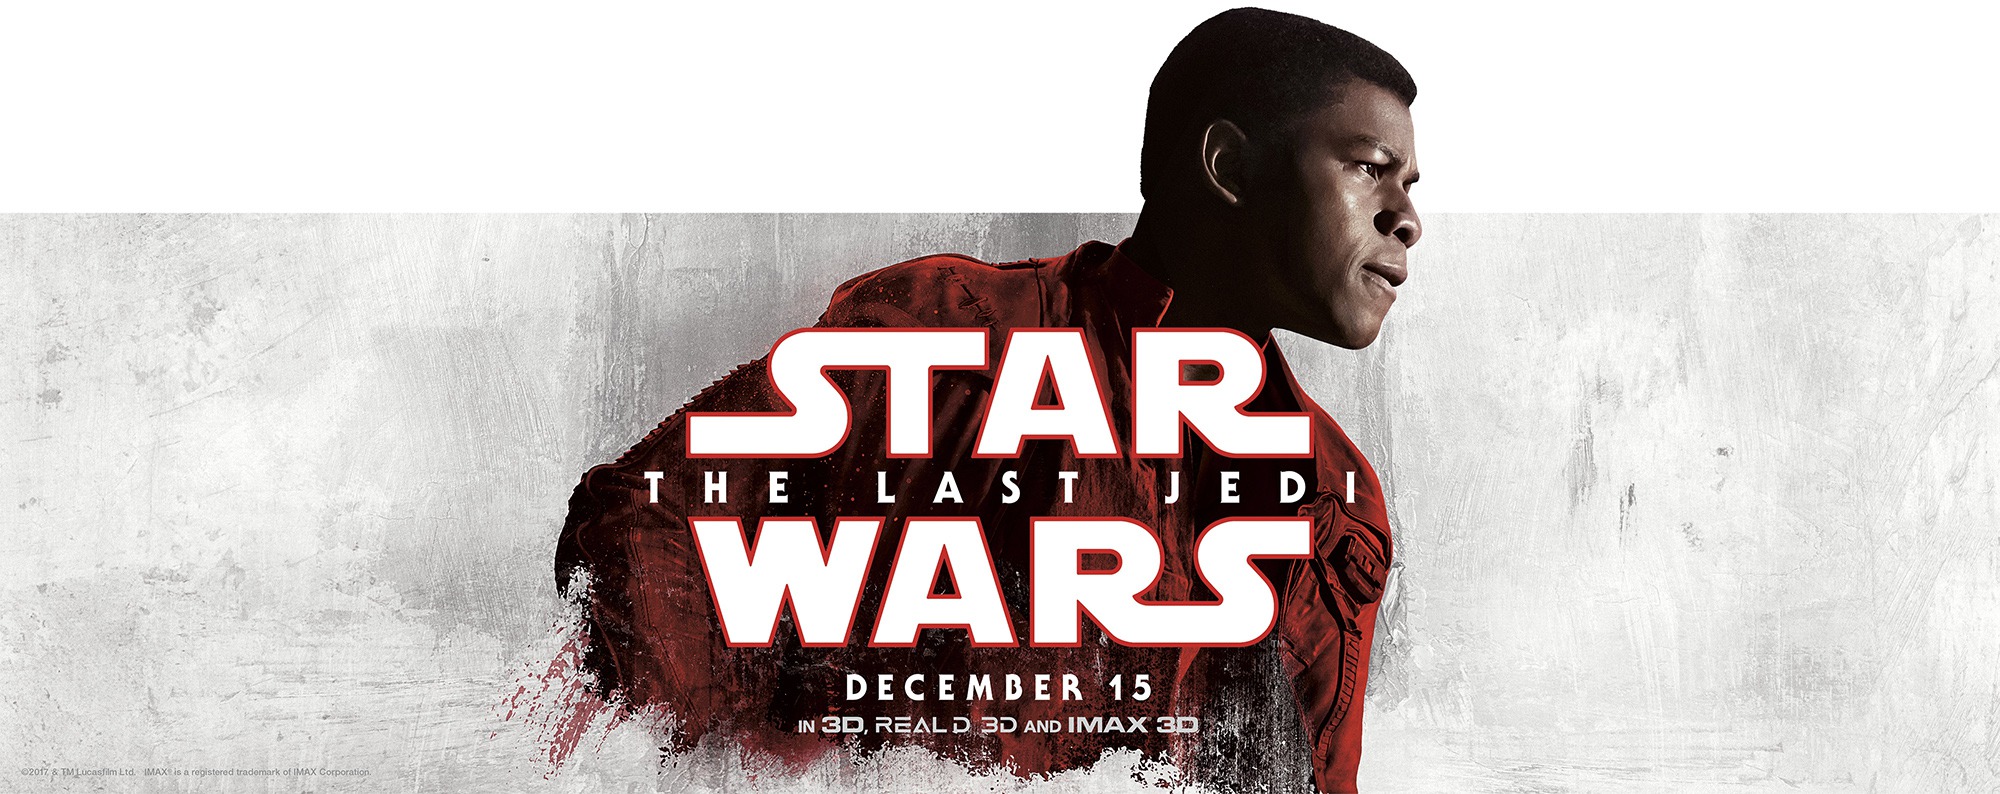 Mega Sized Movie Poster Image for Star Wars: The Last Jedi (#62 of 67)